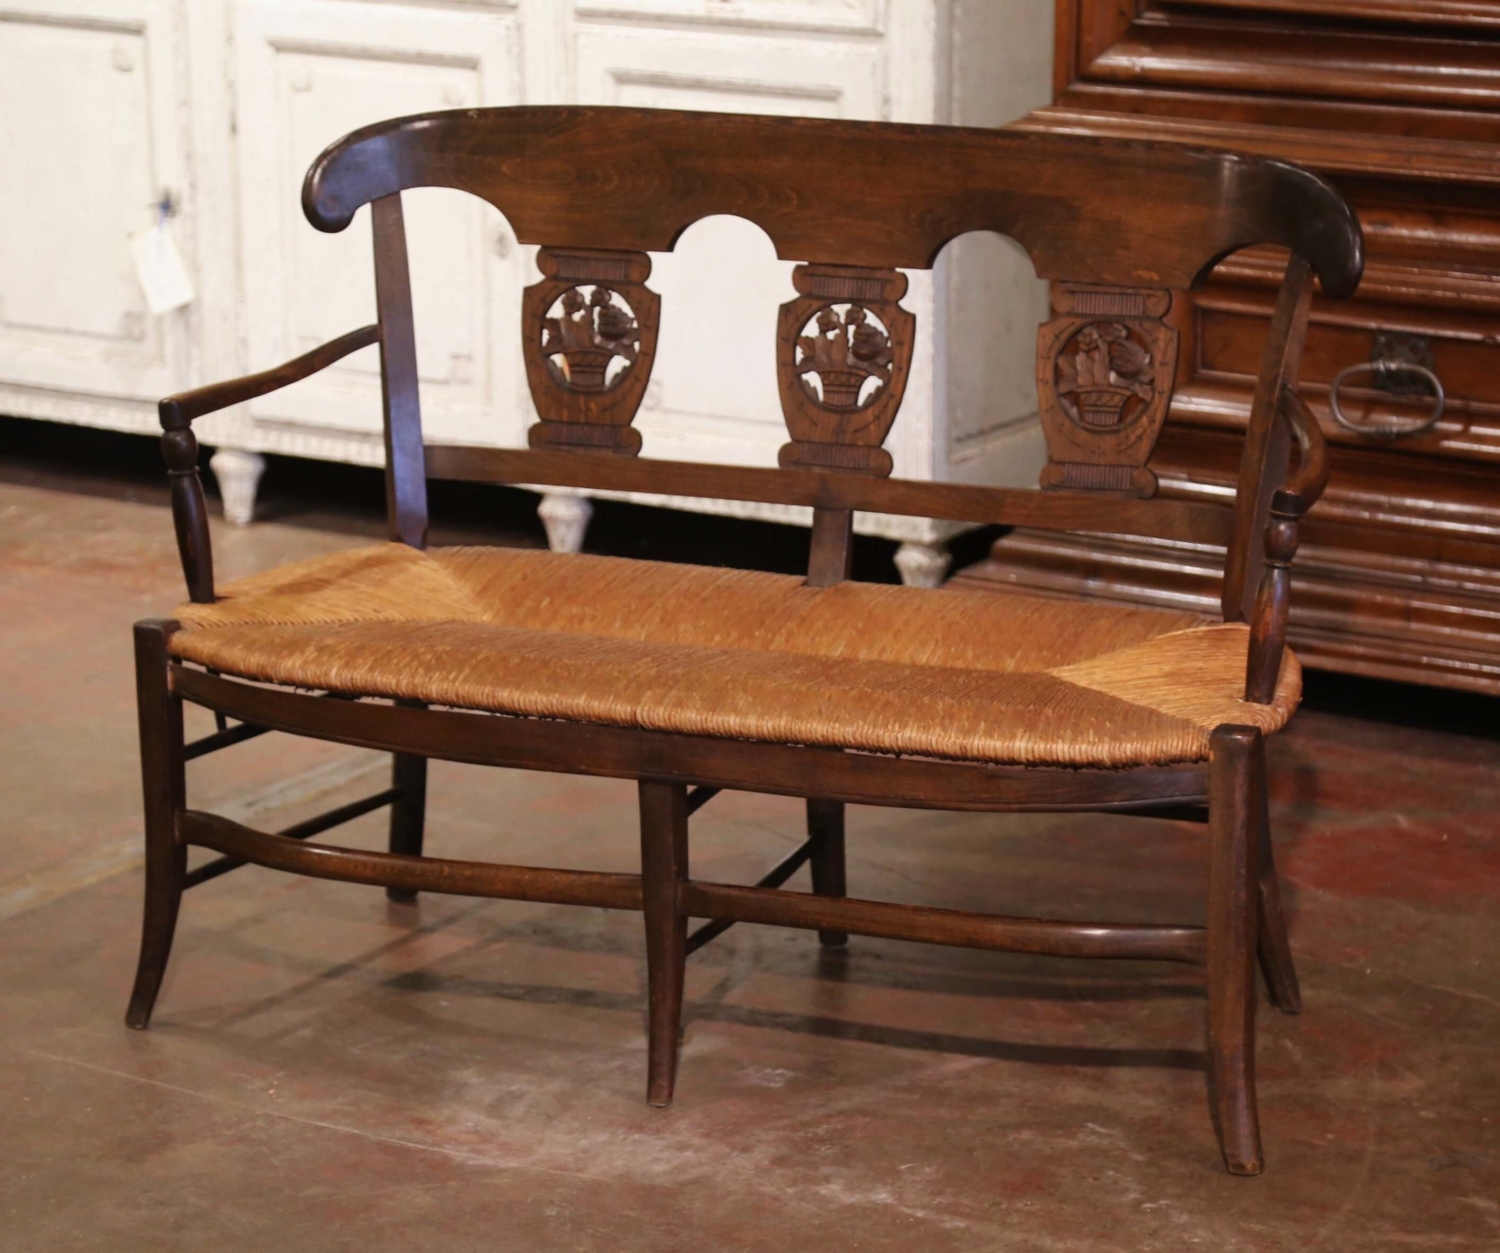 19th Century French Carved Beech Wood and Rush Settee Bench from Normandy -  Country French Interiors